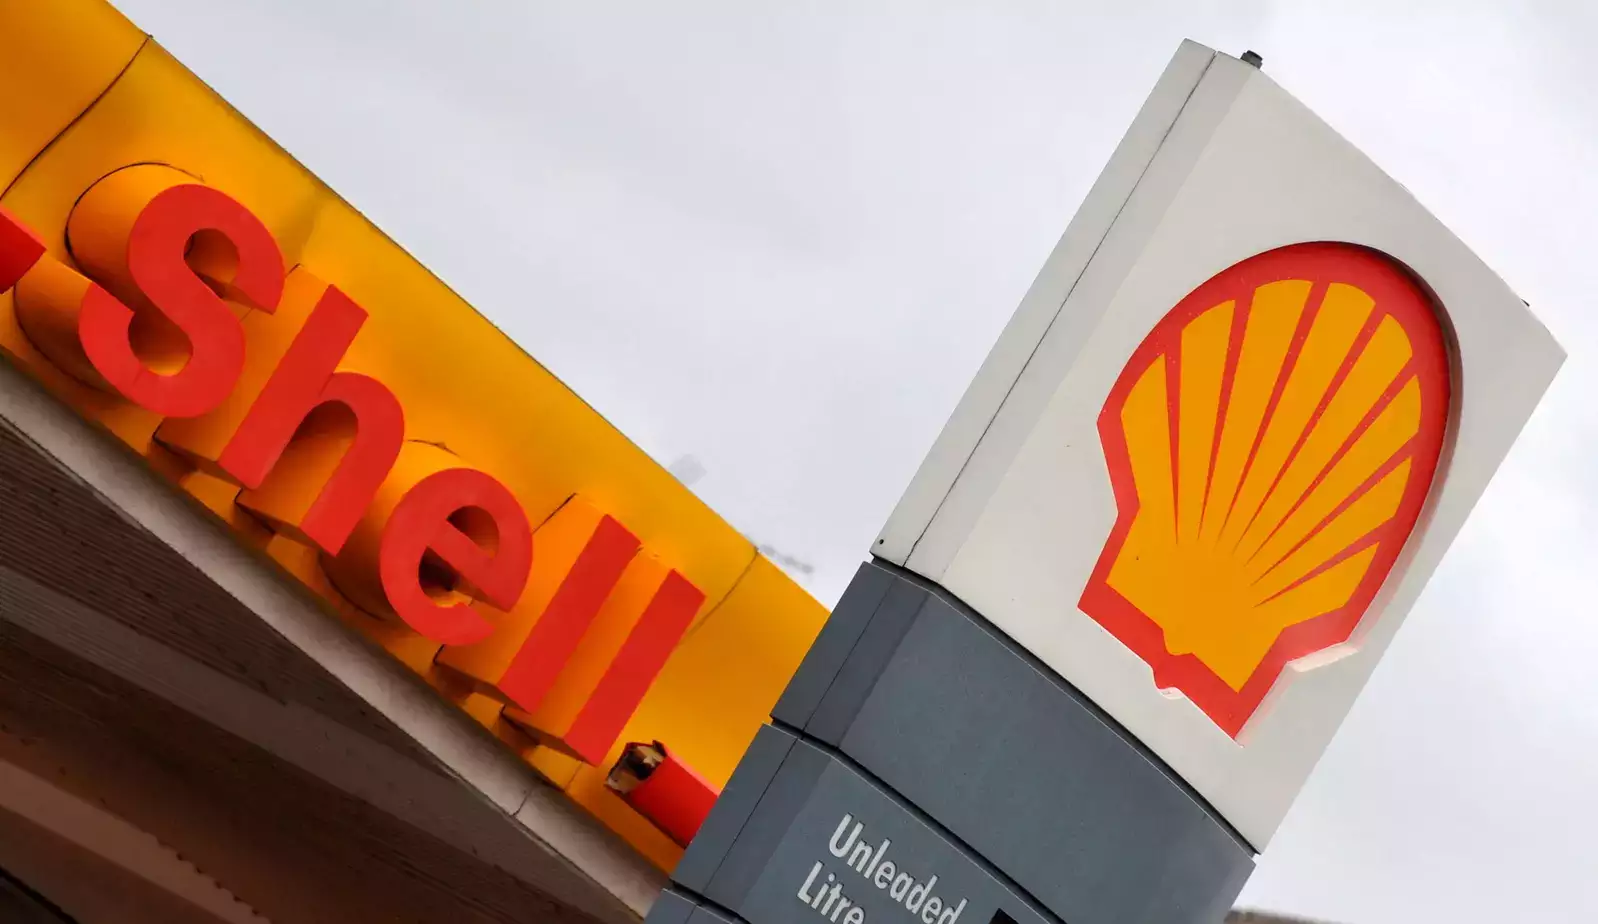 Australia’s New South Wales Awards $2.5 bln Battery Contract to Shell